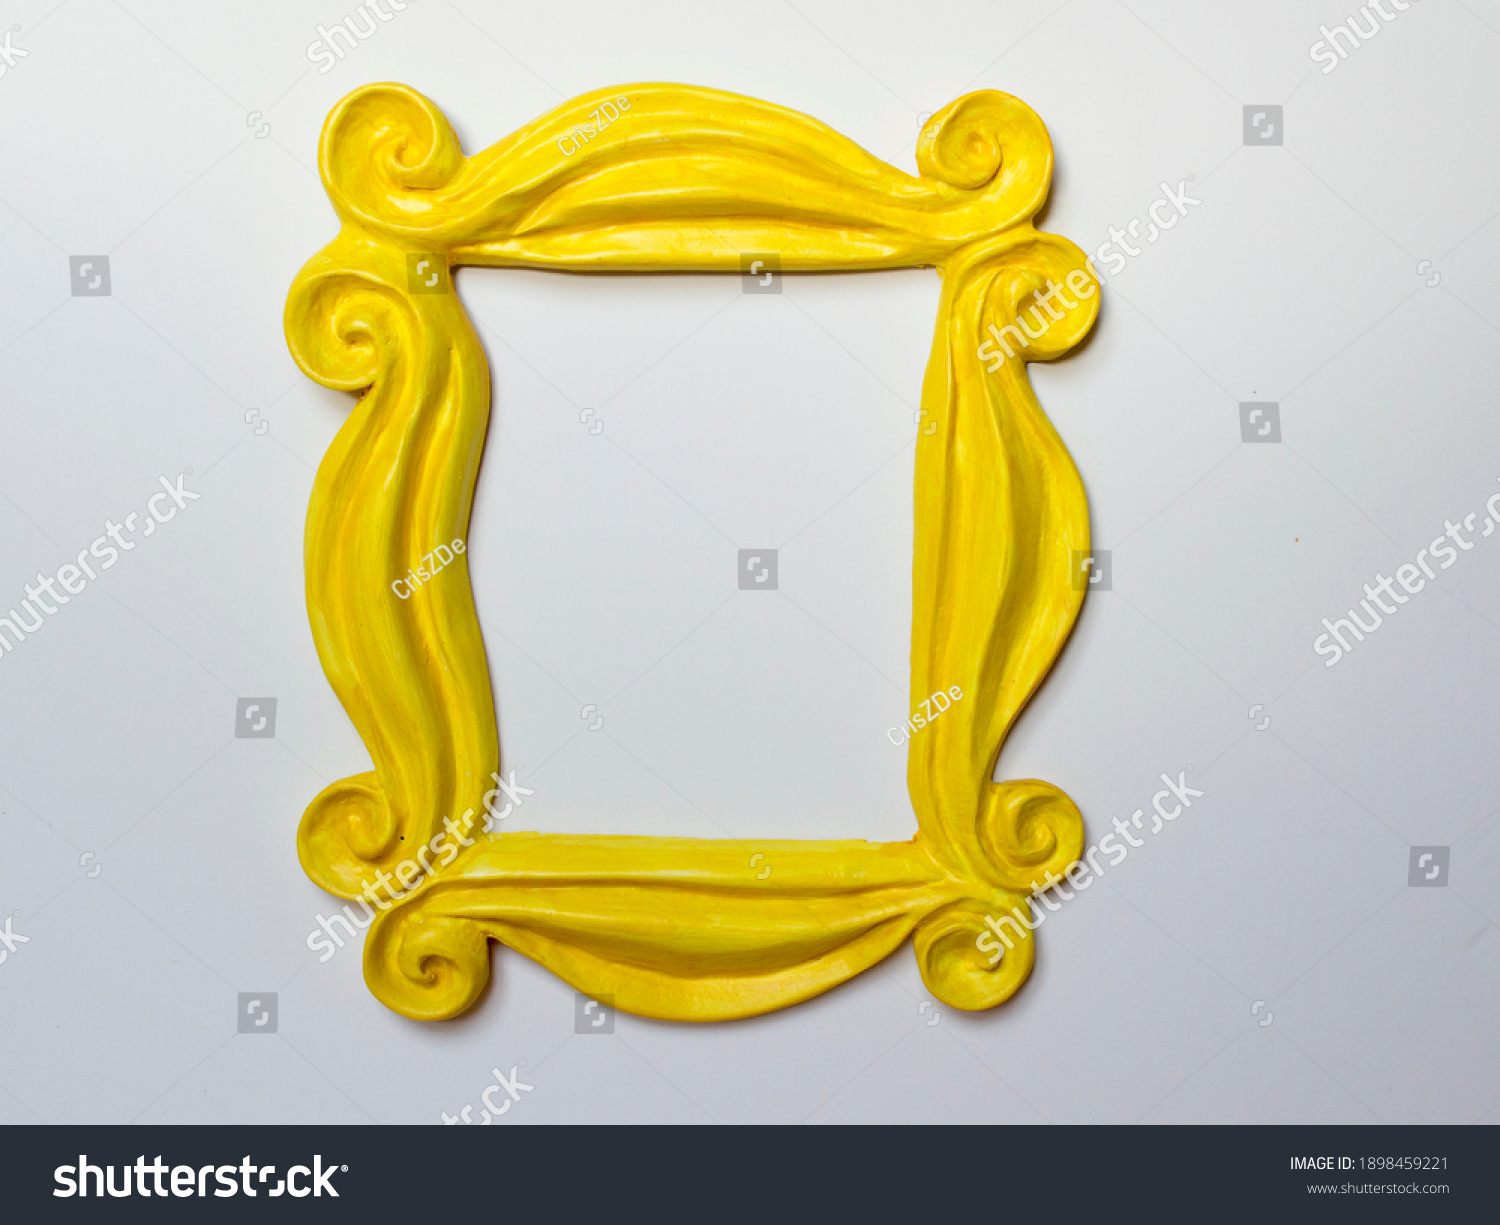 Yellow photo frame or mirror frame with a white background, to frame texts or images. #1898459221